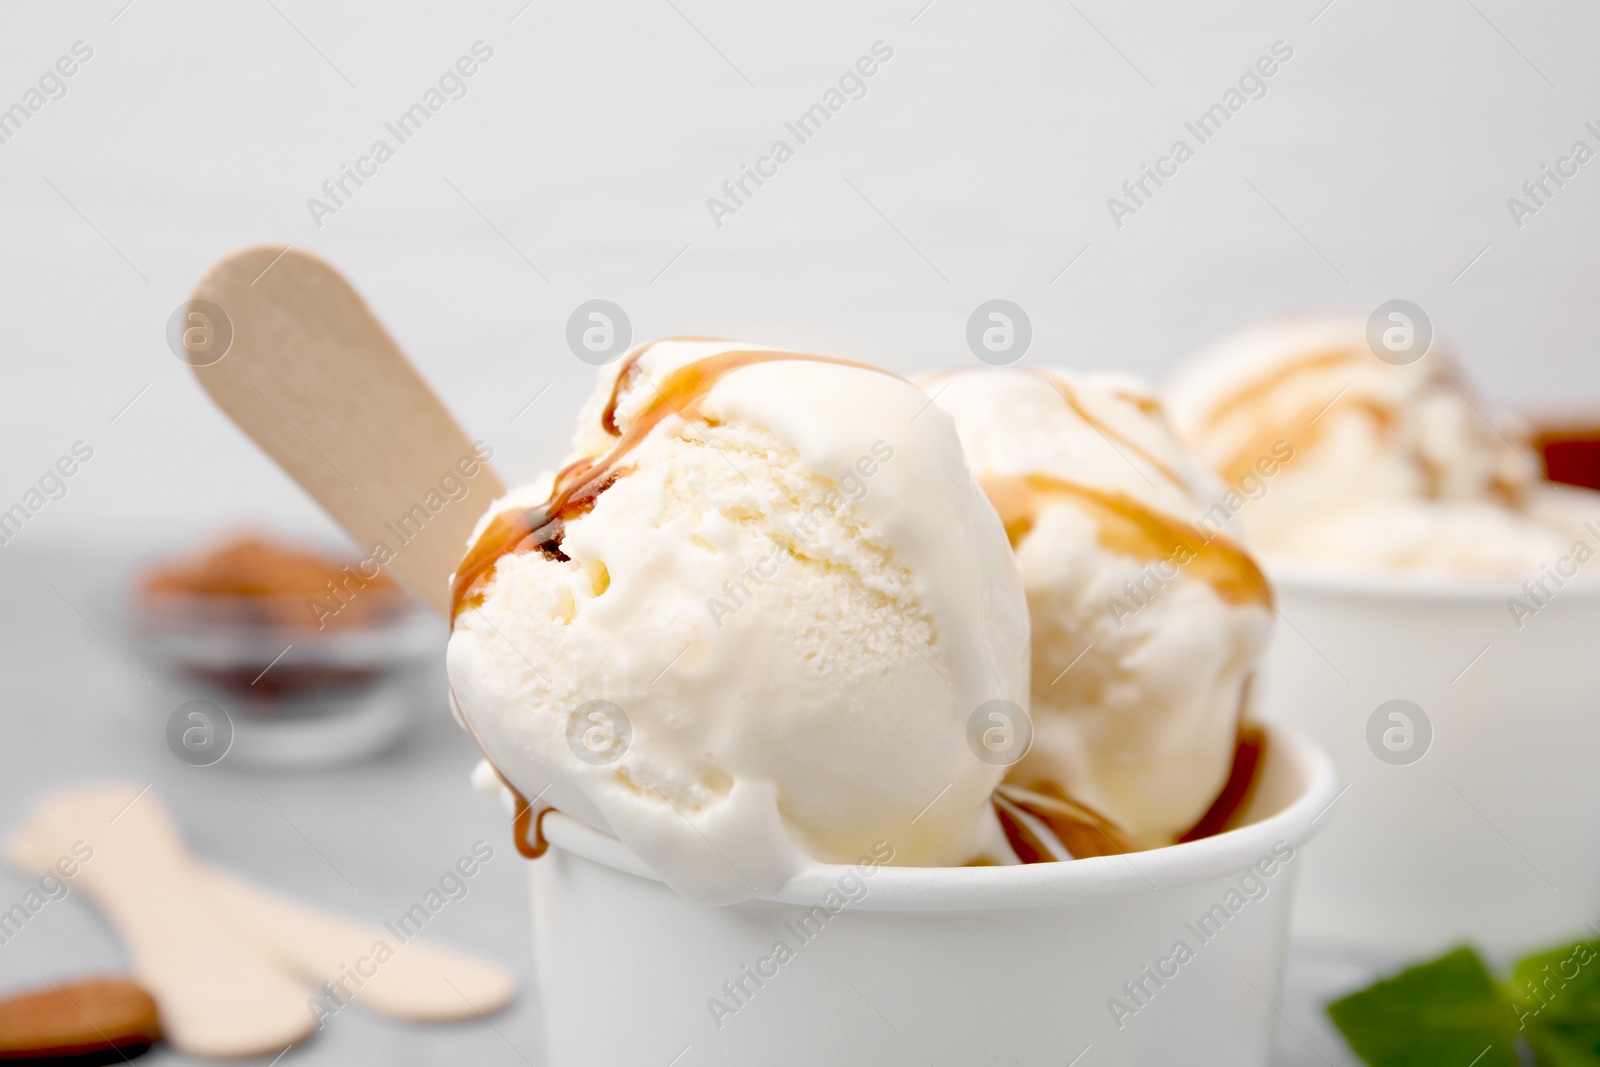 Photo of Scoops of ice cream with caramel sauce in paper cup, closeup